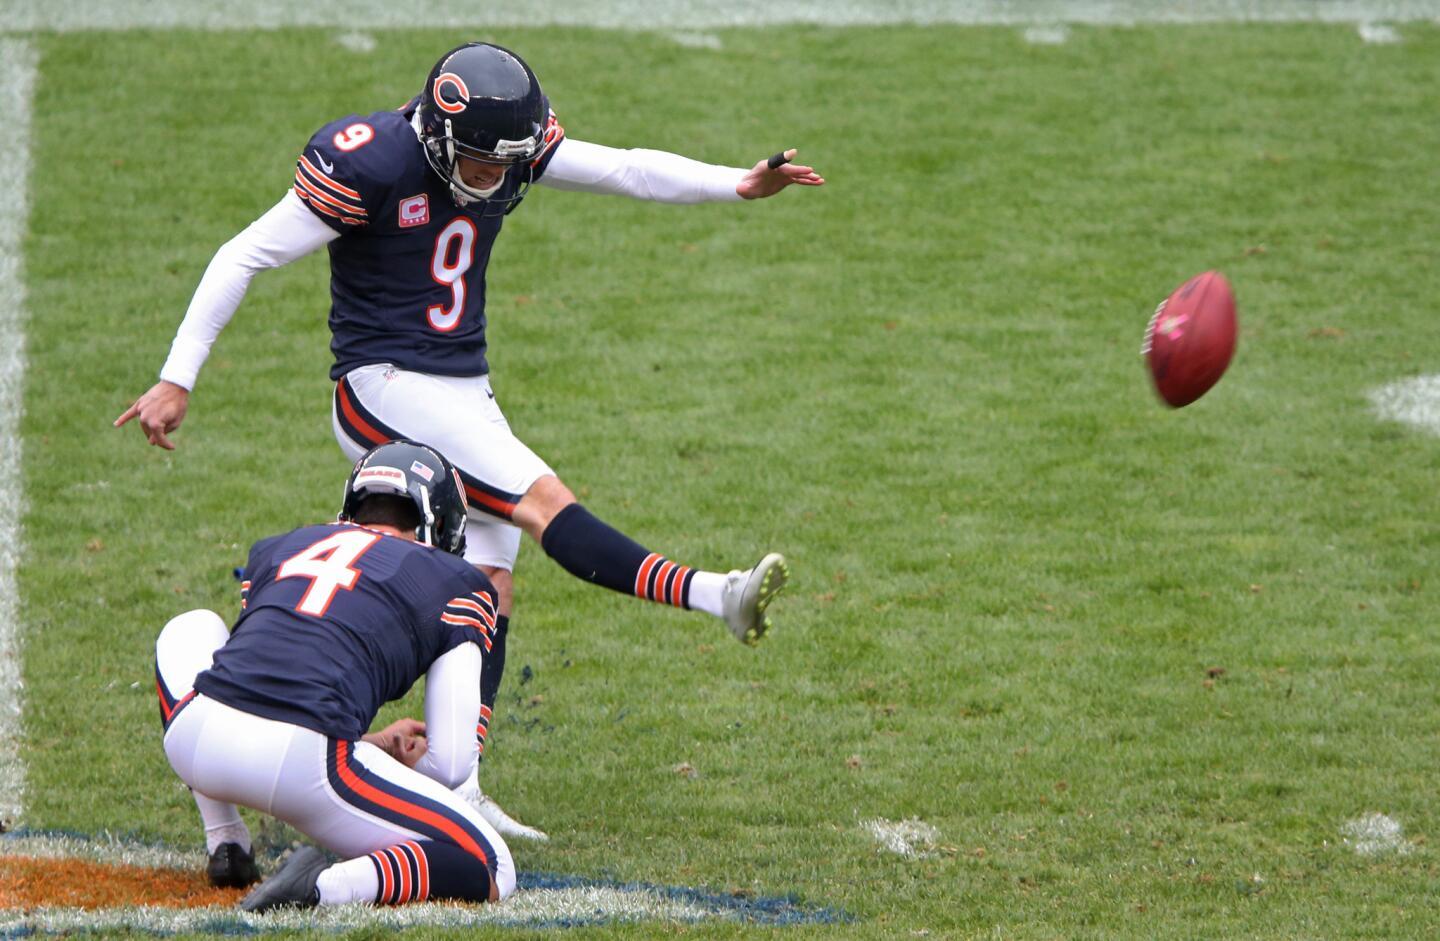 Robbie Gould kicks a 54-yard, game-winning field goal in the fourth quarter against the Oakland Raiders.